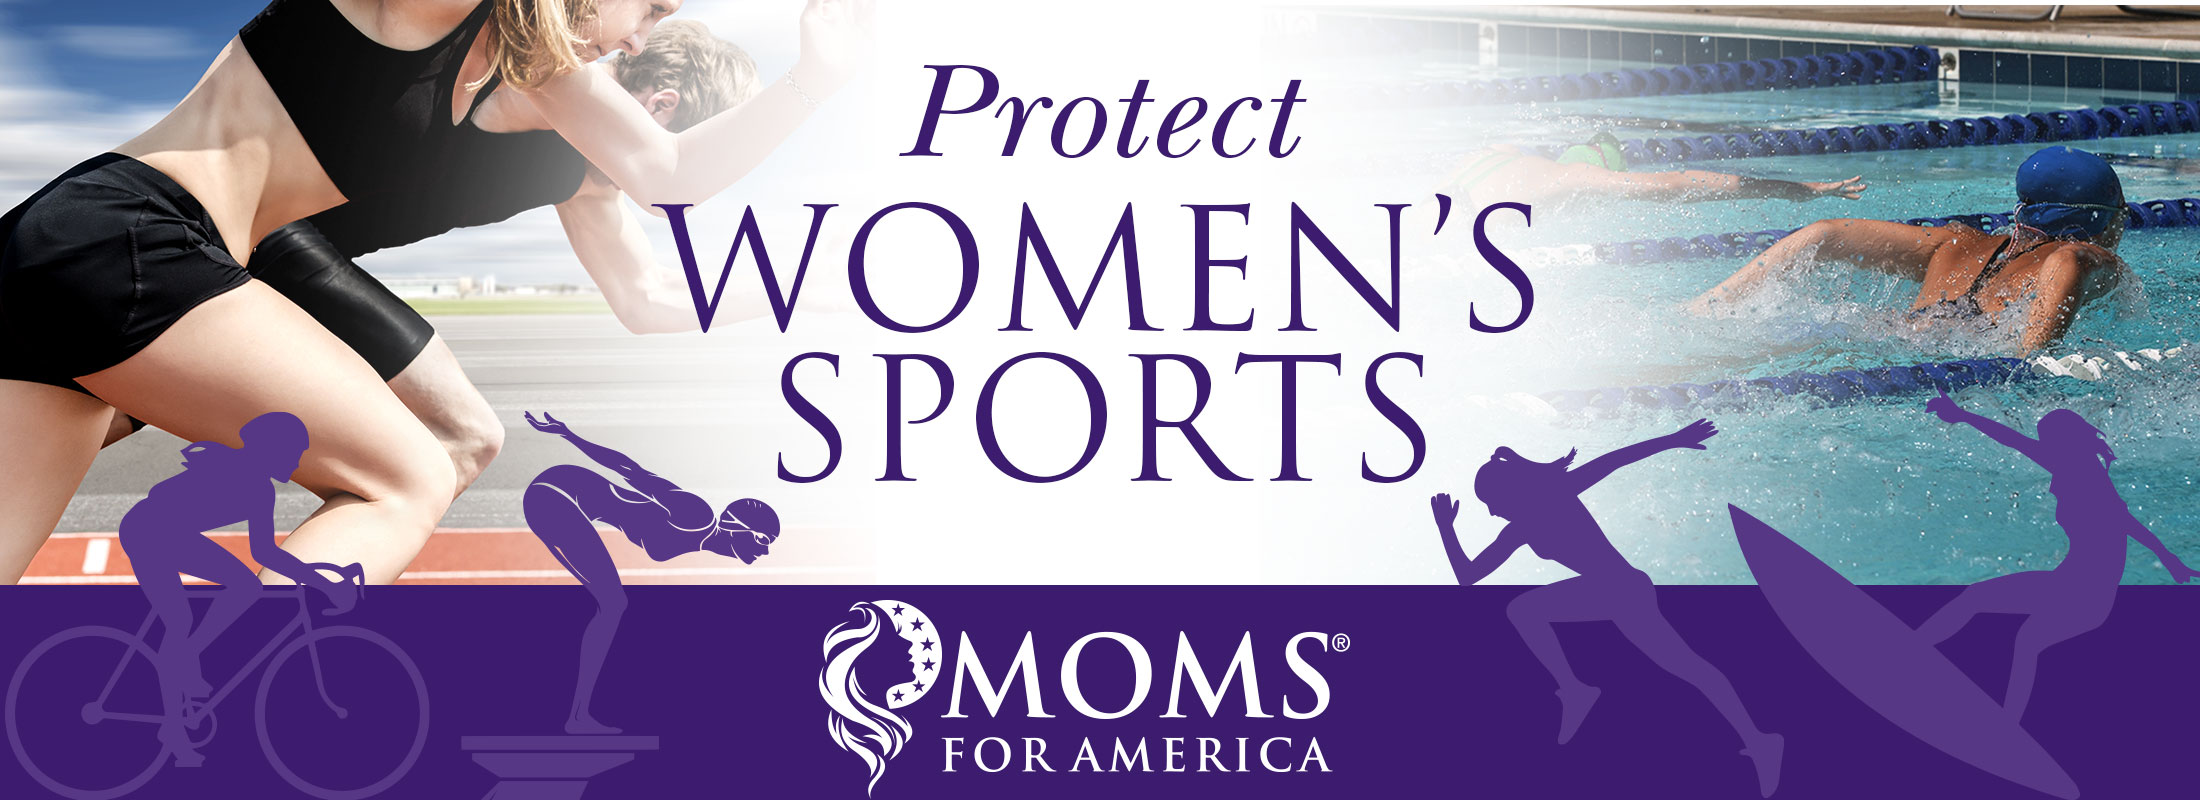 Protect Women's Sports Conference<br />
